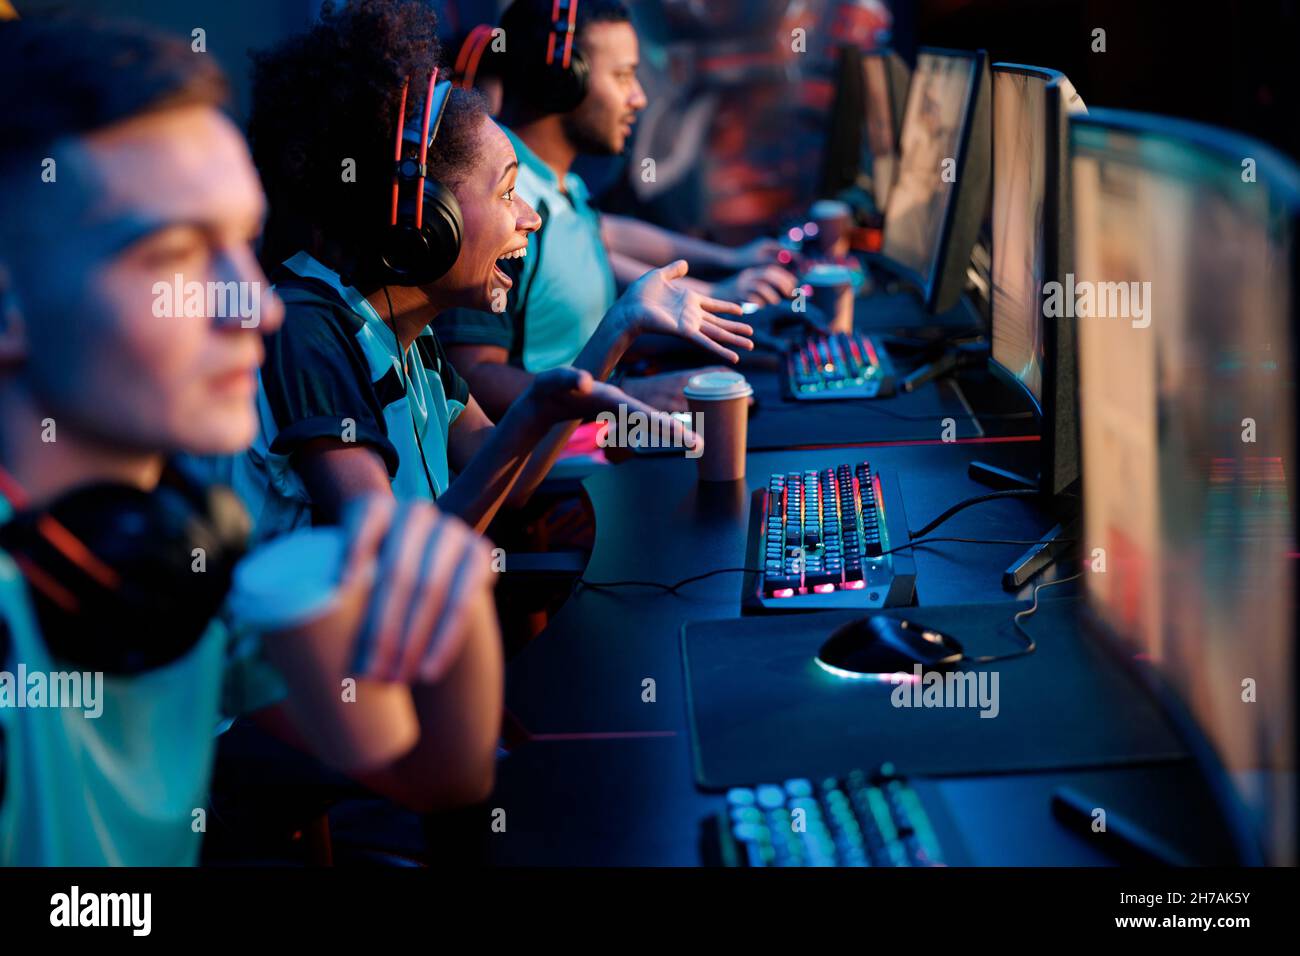 Esports team playing game on computers in gaming club Stock Photo